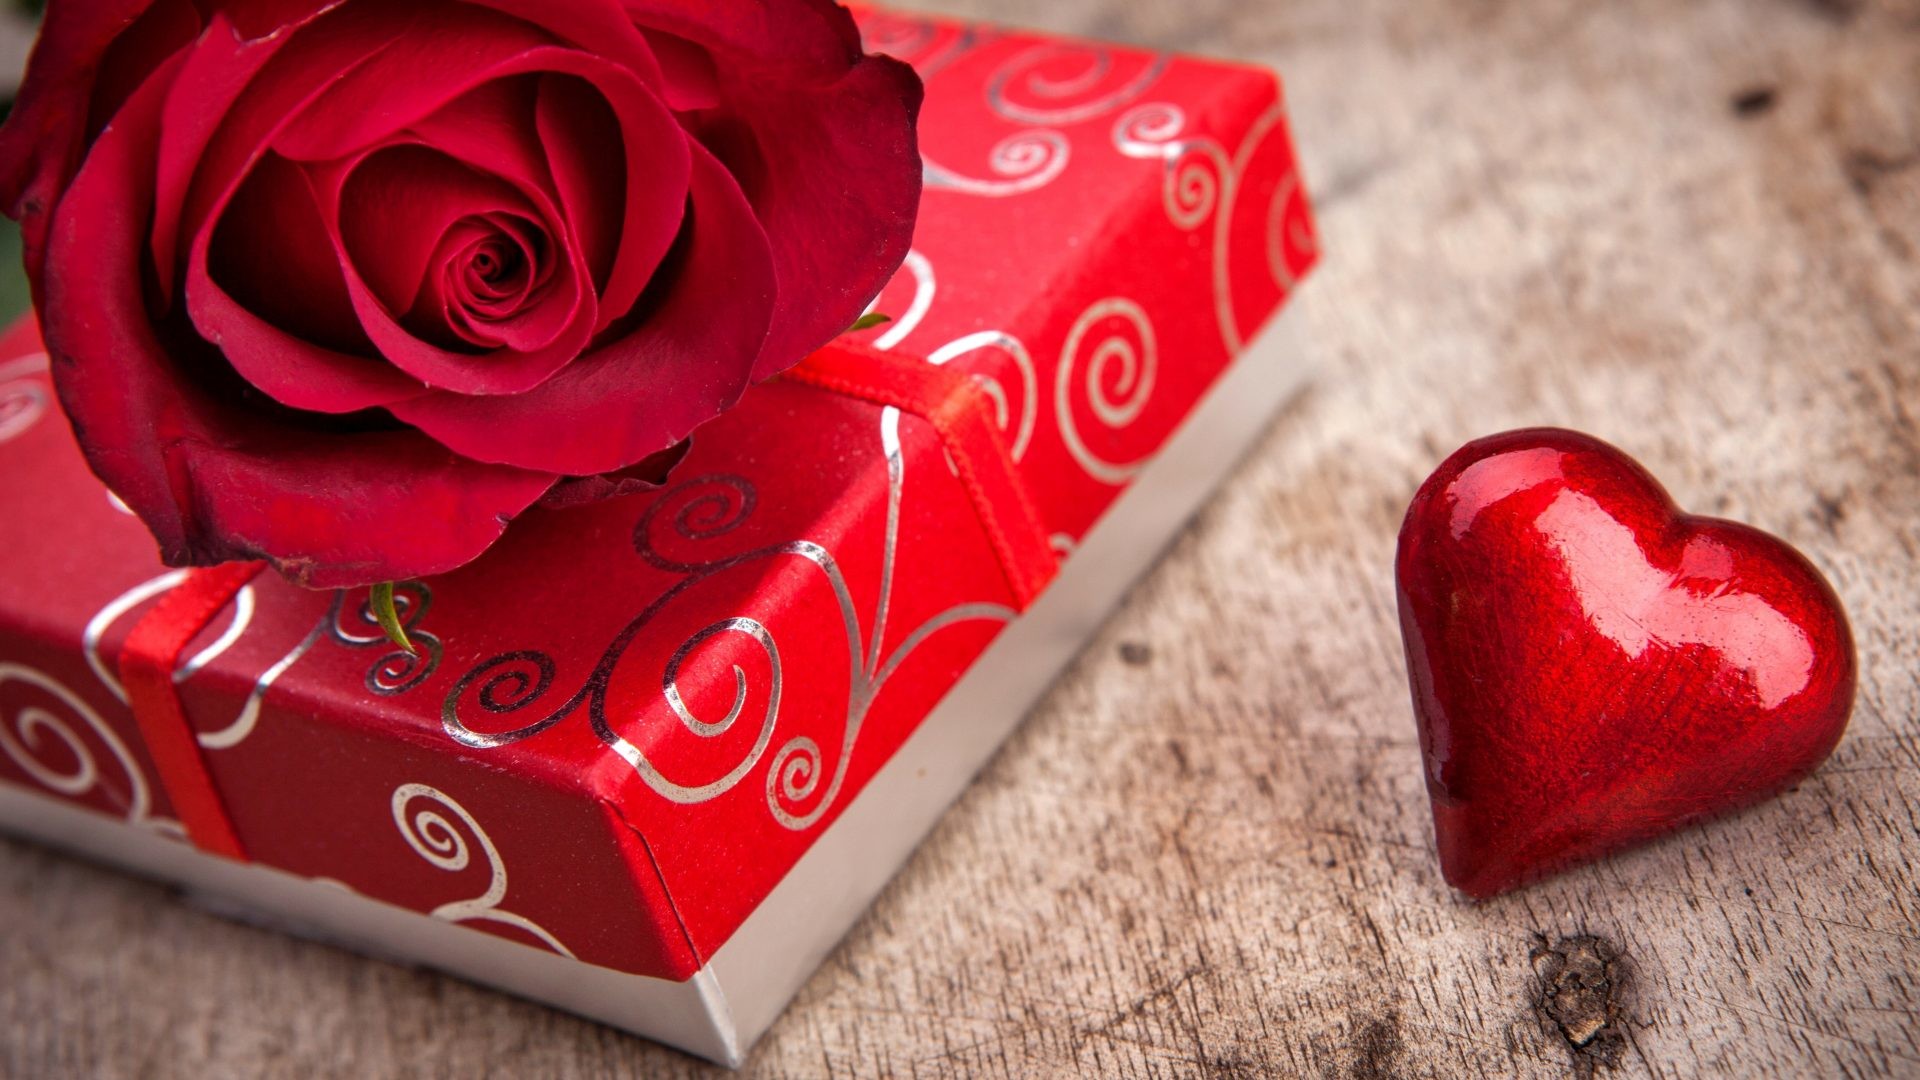 1920x1080 Gift Tag - Rose Couple Heart Life Chocolate Romance Flowers Red Gift Love  Nature Wallpapers Animated